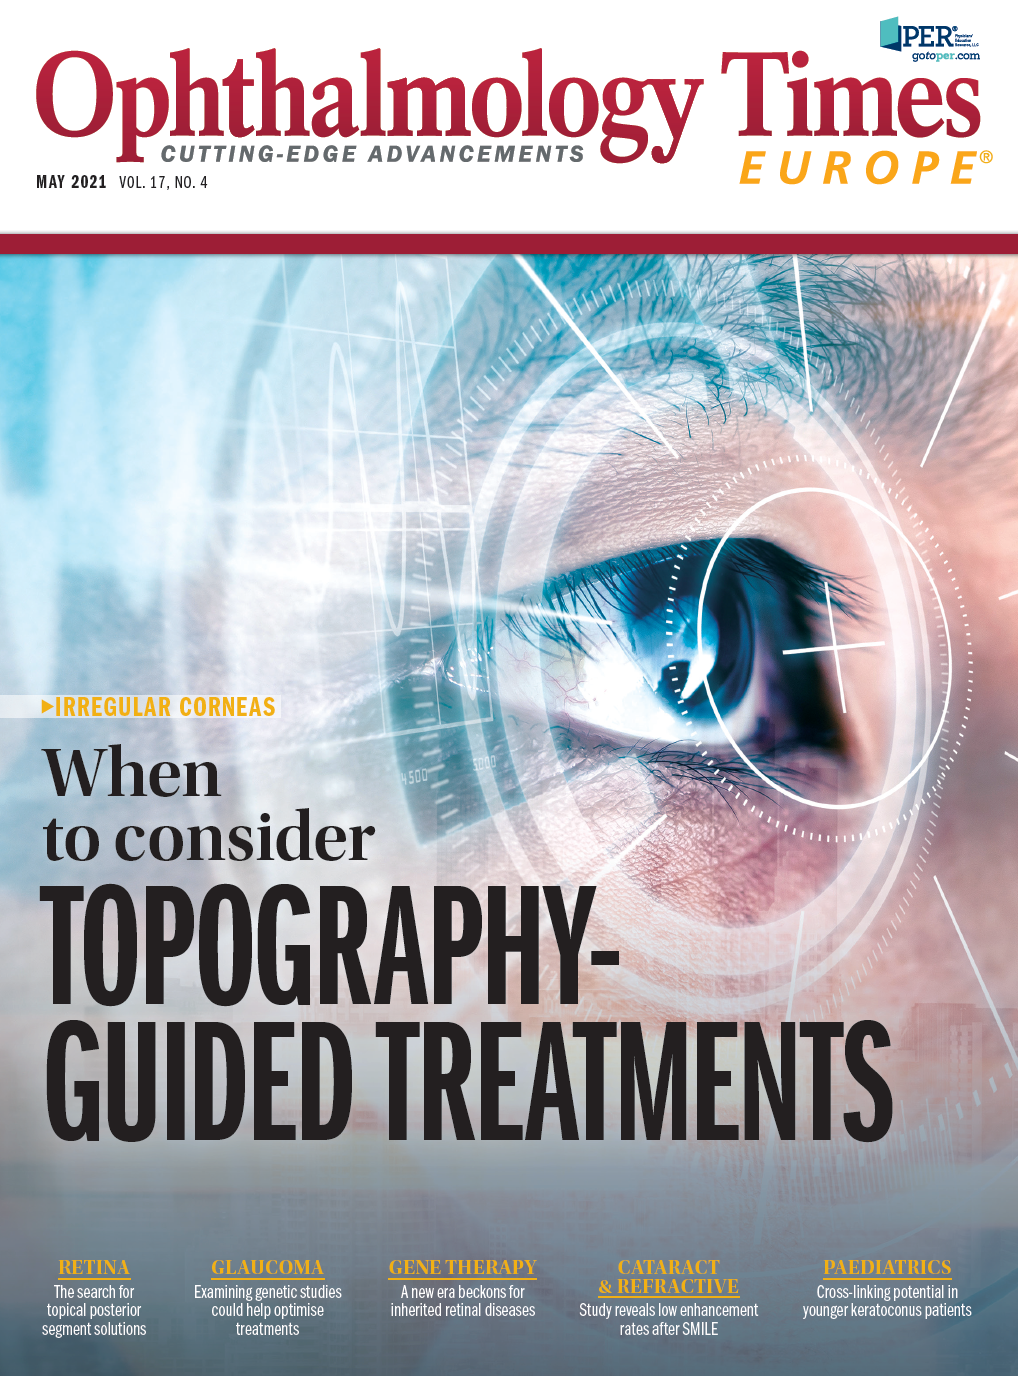 Ophthalmology Times Europe May 2021